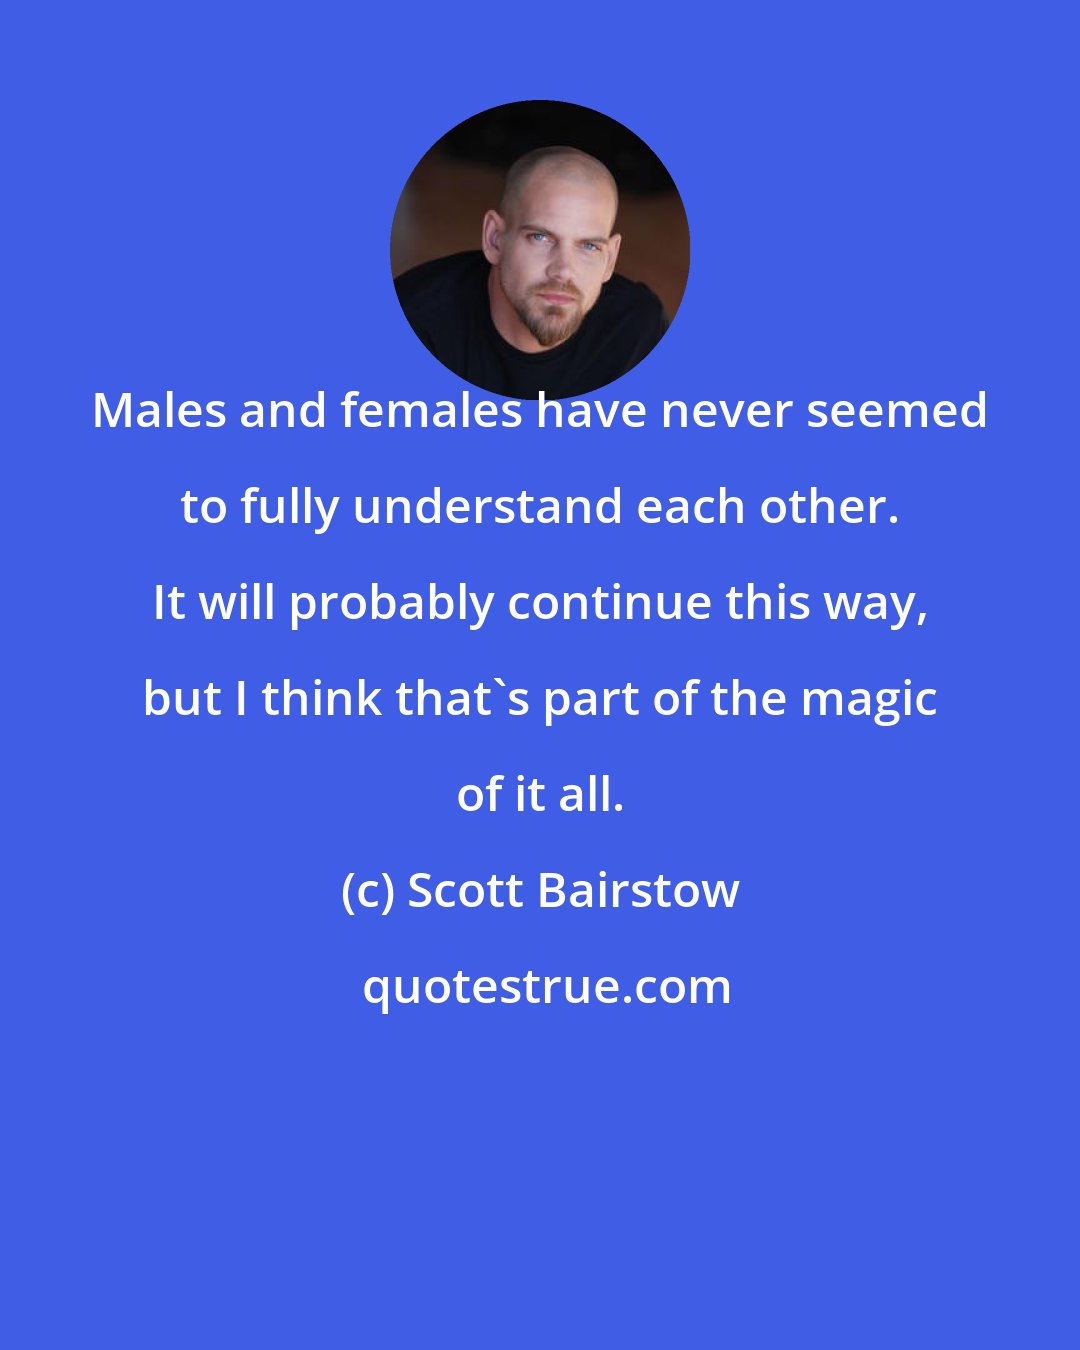 Scott Bairstow: Males and females have never seemed to fully understand each other. It will probably continue this way, but I think that's part of the magic of it all.